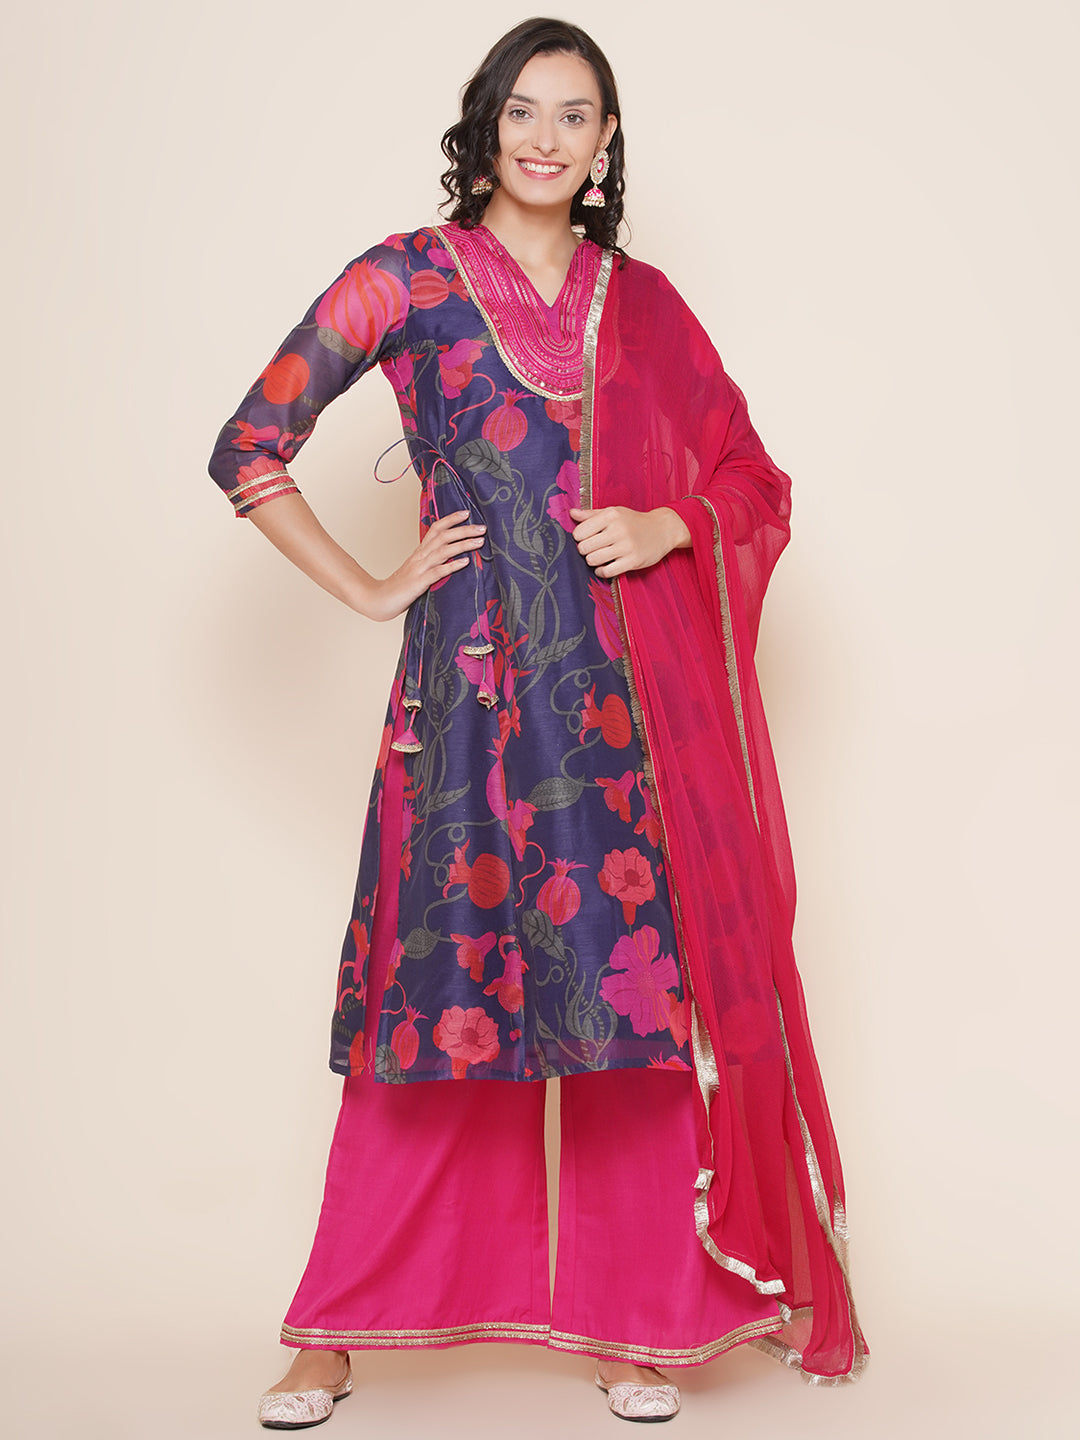 Bhama Couture Blue Pink Floral Print A-Line Yoke Embroidered Kurta & Pink Solid Plazzos With Dupatta